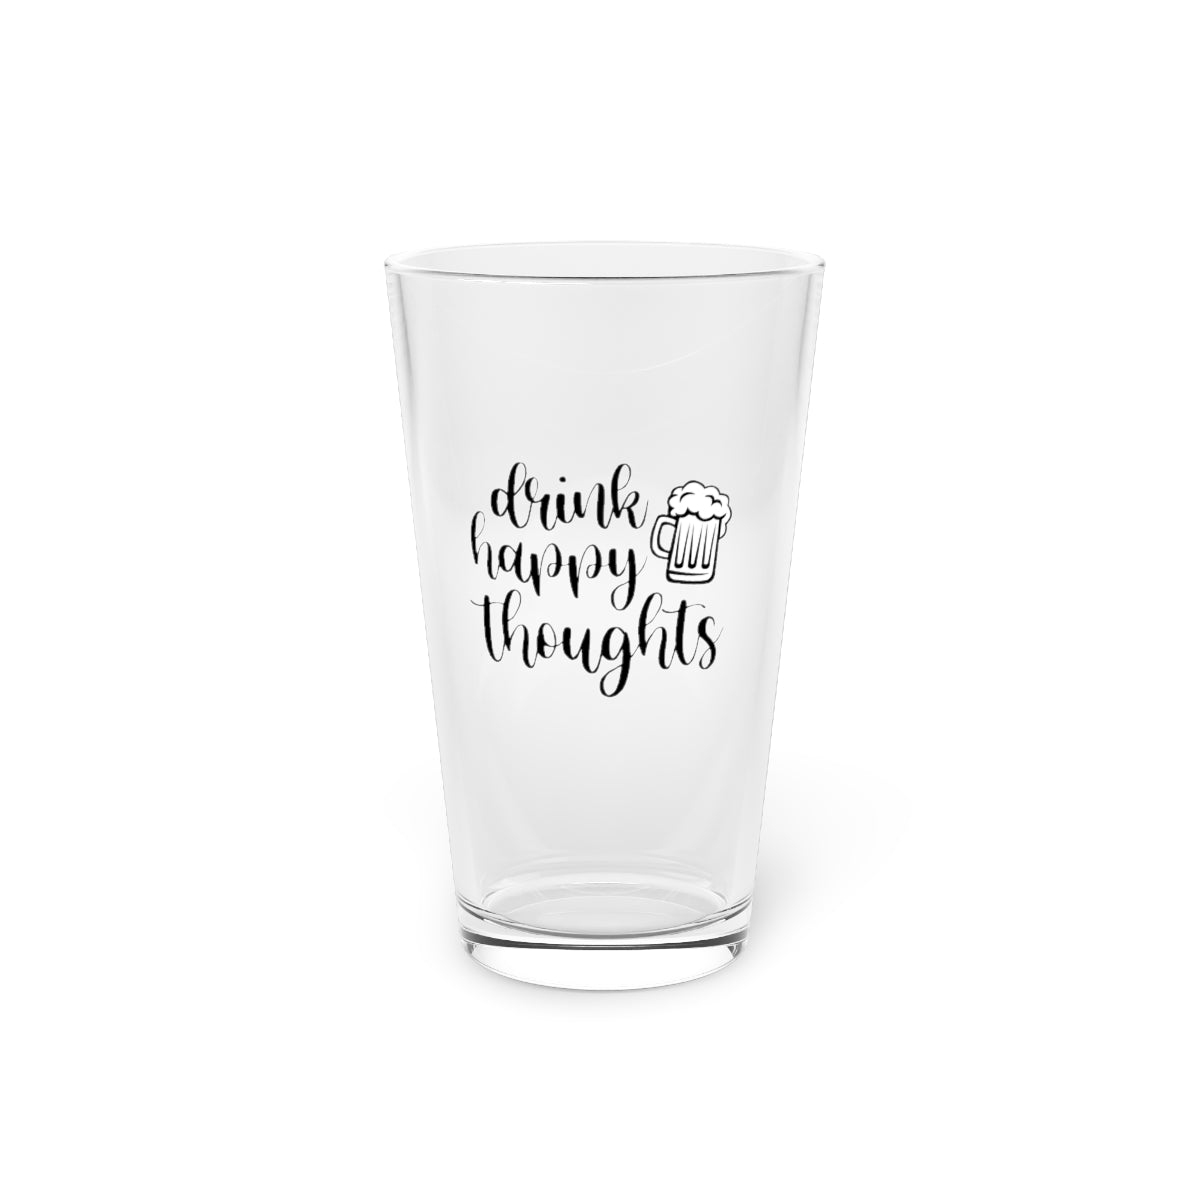 Drink Happy Thoughts | Funny Beer Glass